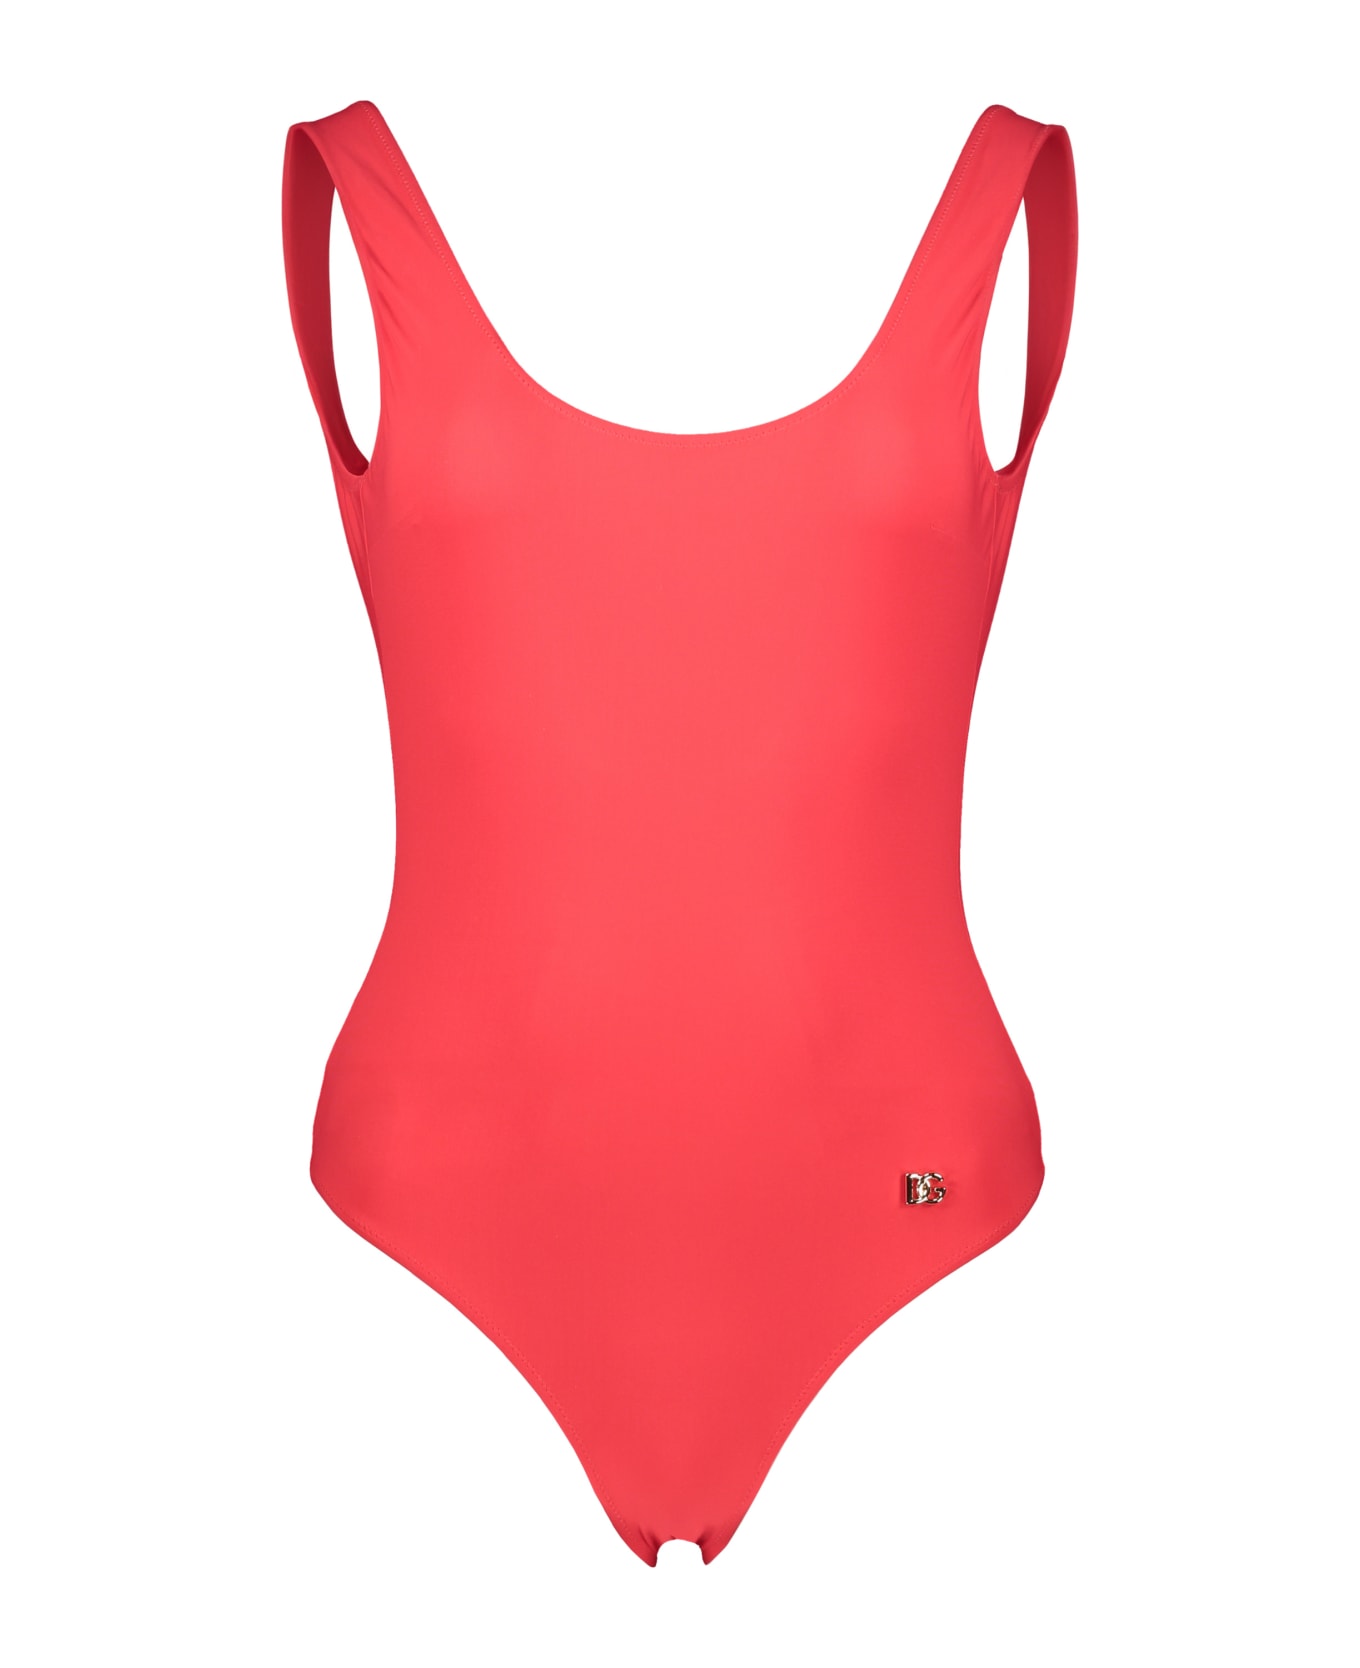 Dolce & Gabbana One-piece Swimsuit - Coral